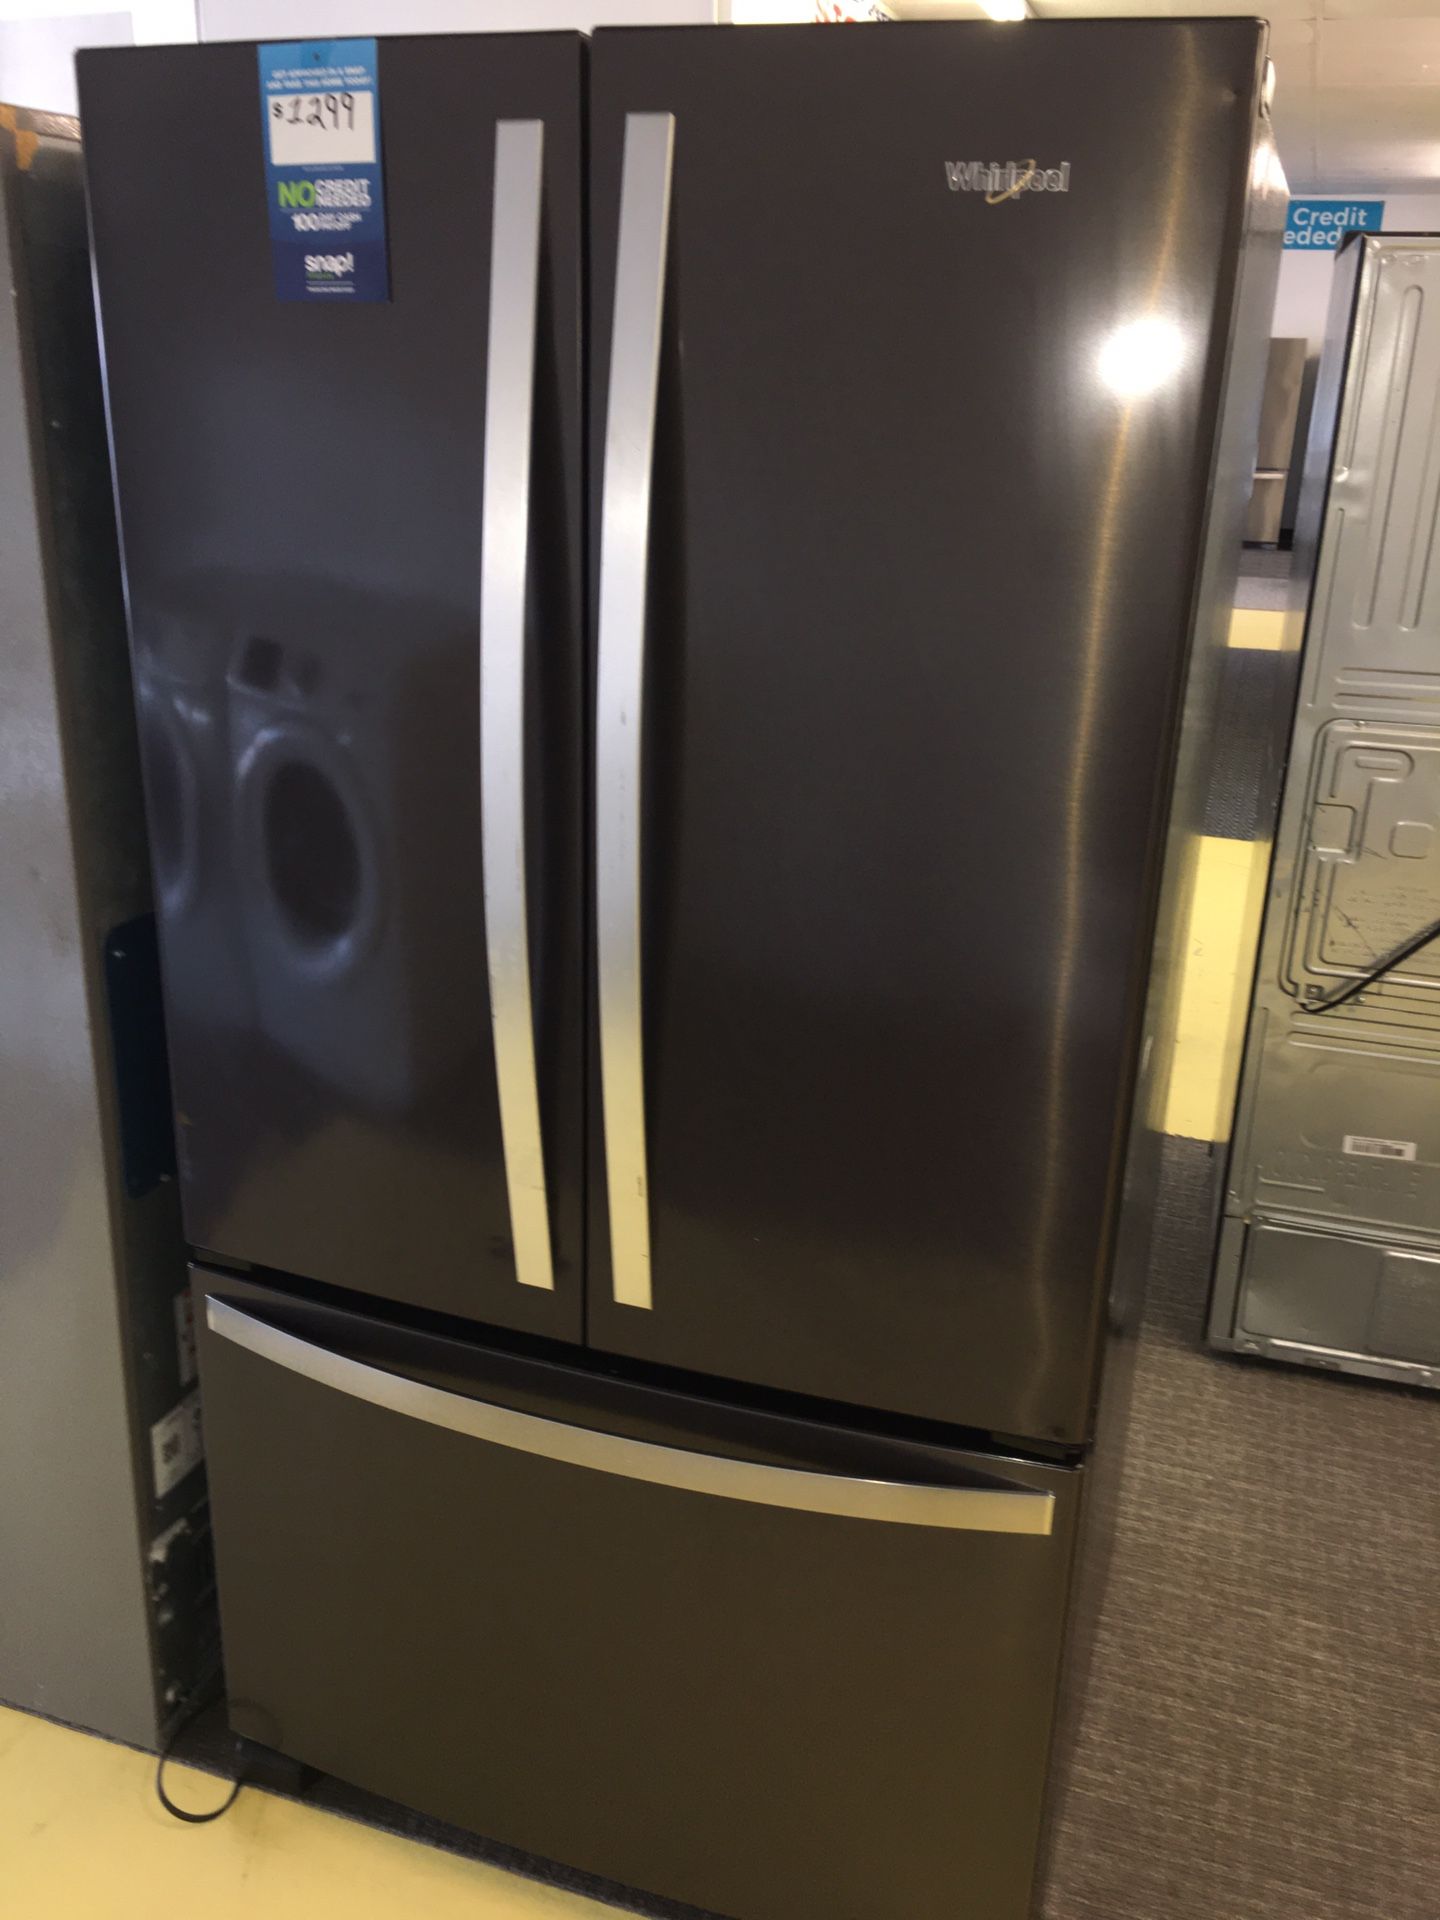 Whirlpool Black Stainless Steel French Door Refrigerator Scraches Dent With Warranty No Credit Needed Just $39 Down payment Cash price $1,300